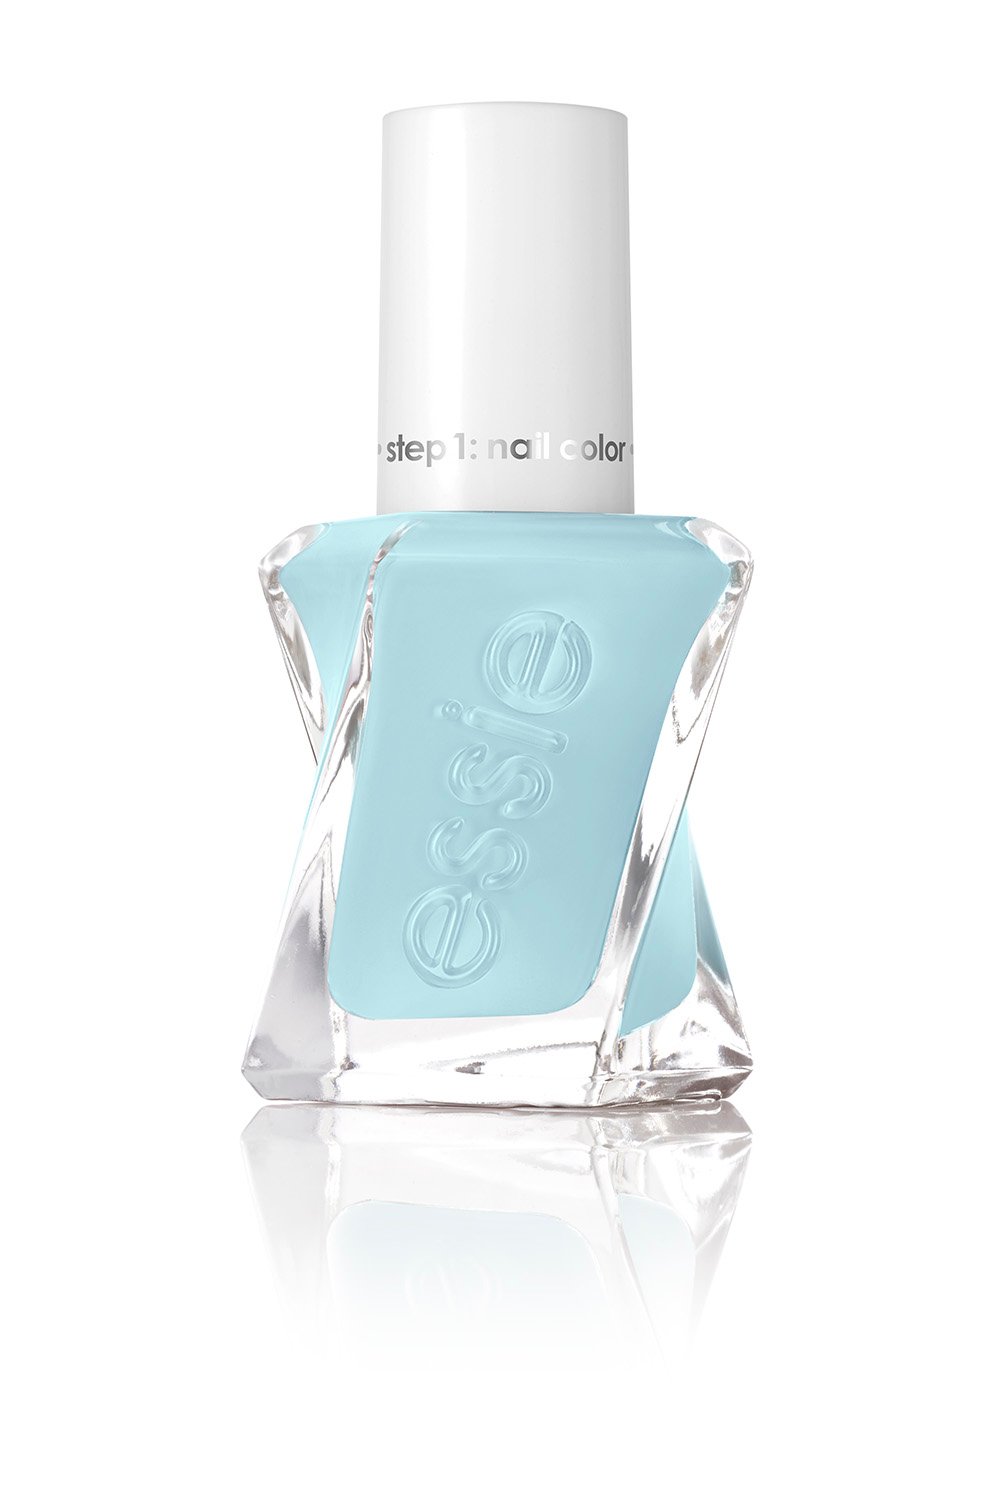 ESSIE-GelCouture-DyeMentions-Nail-Polish-Bottle